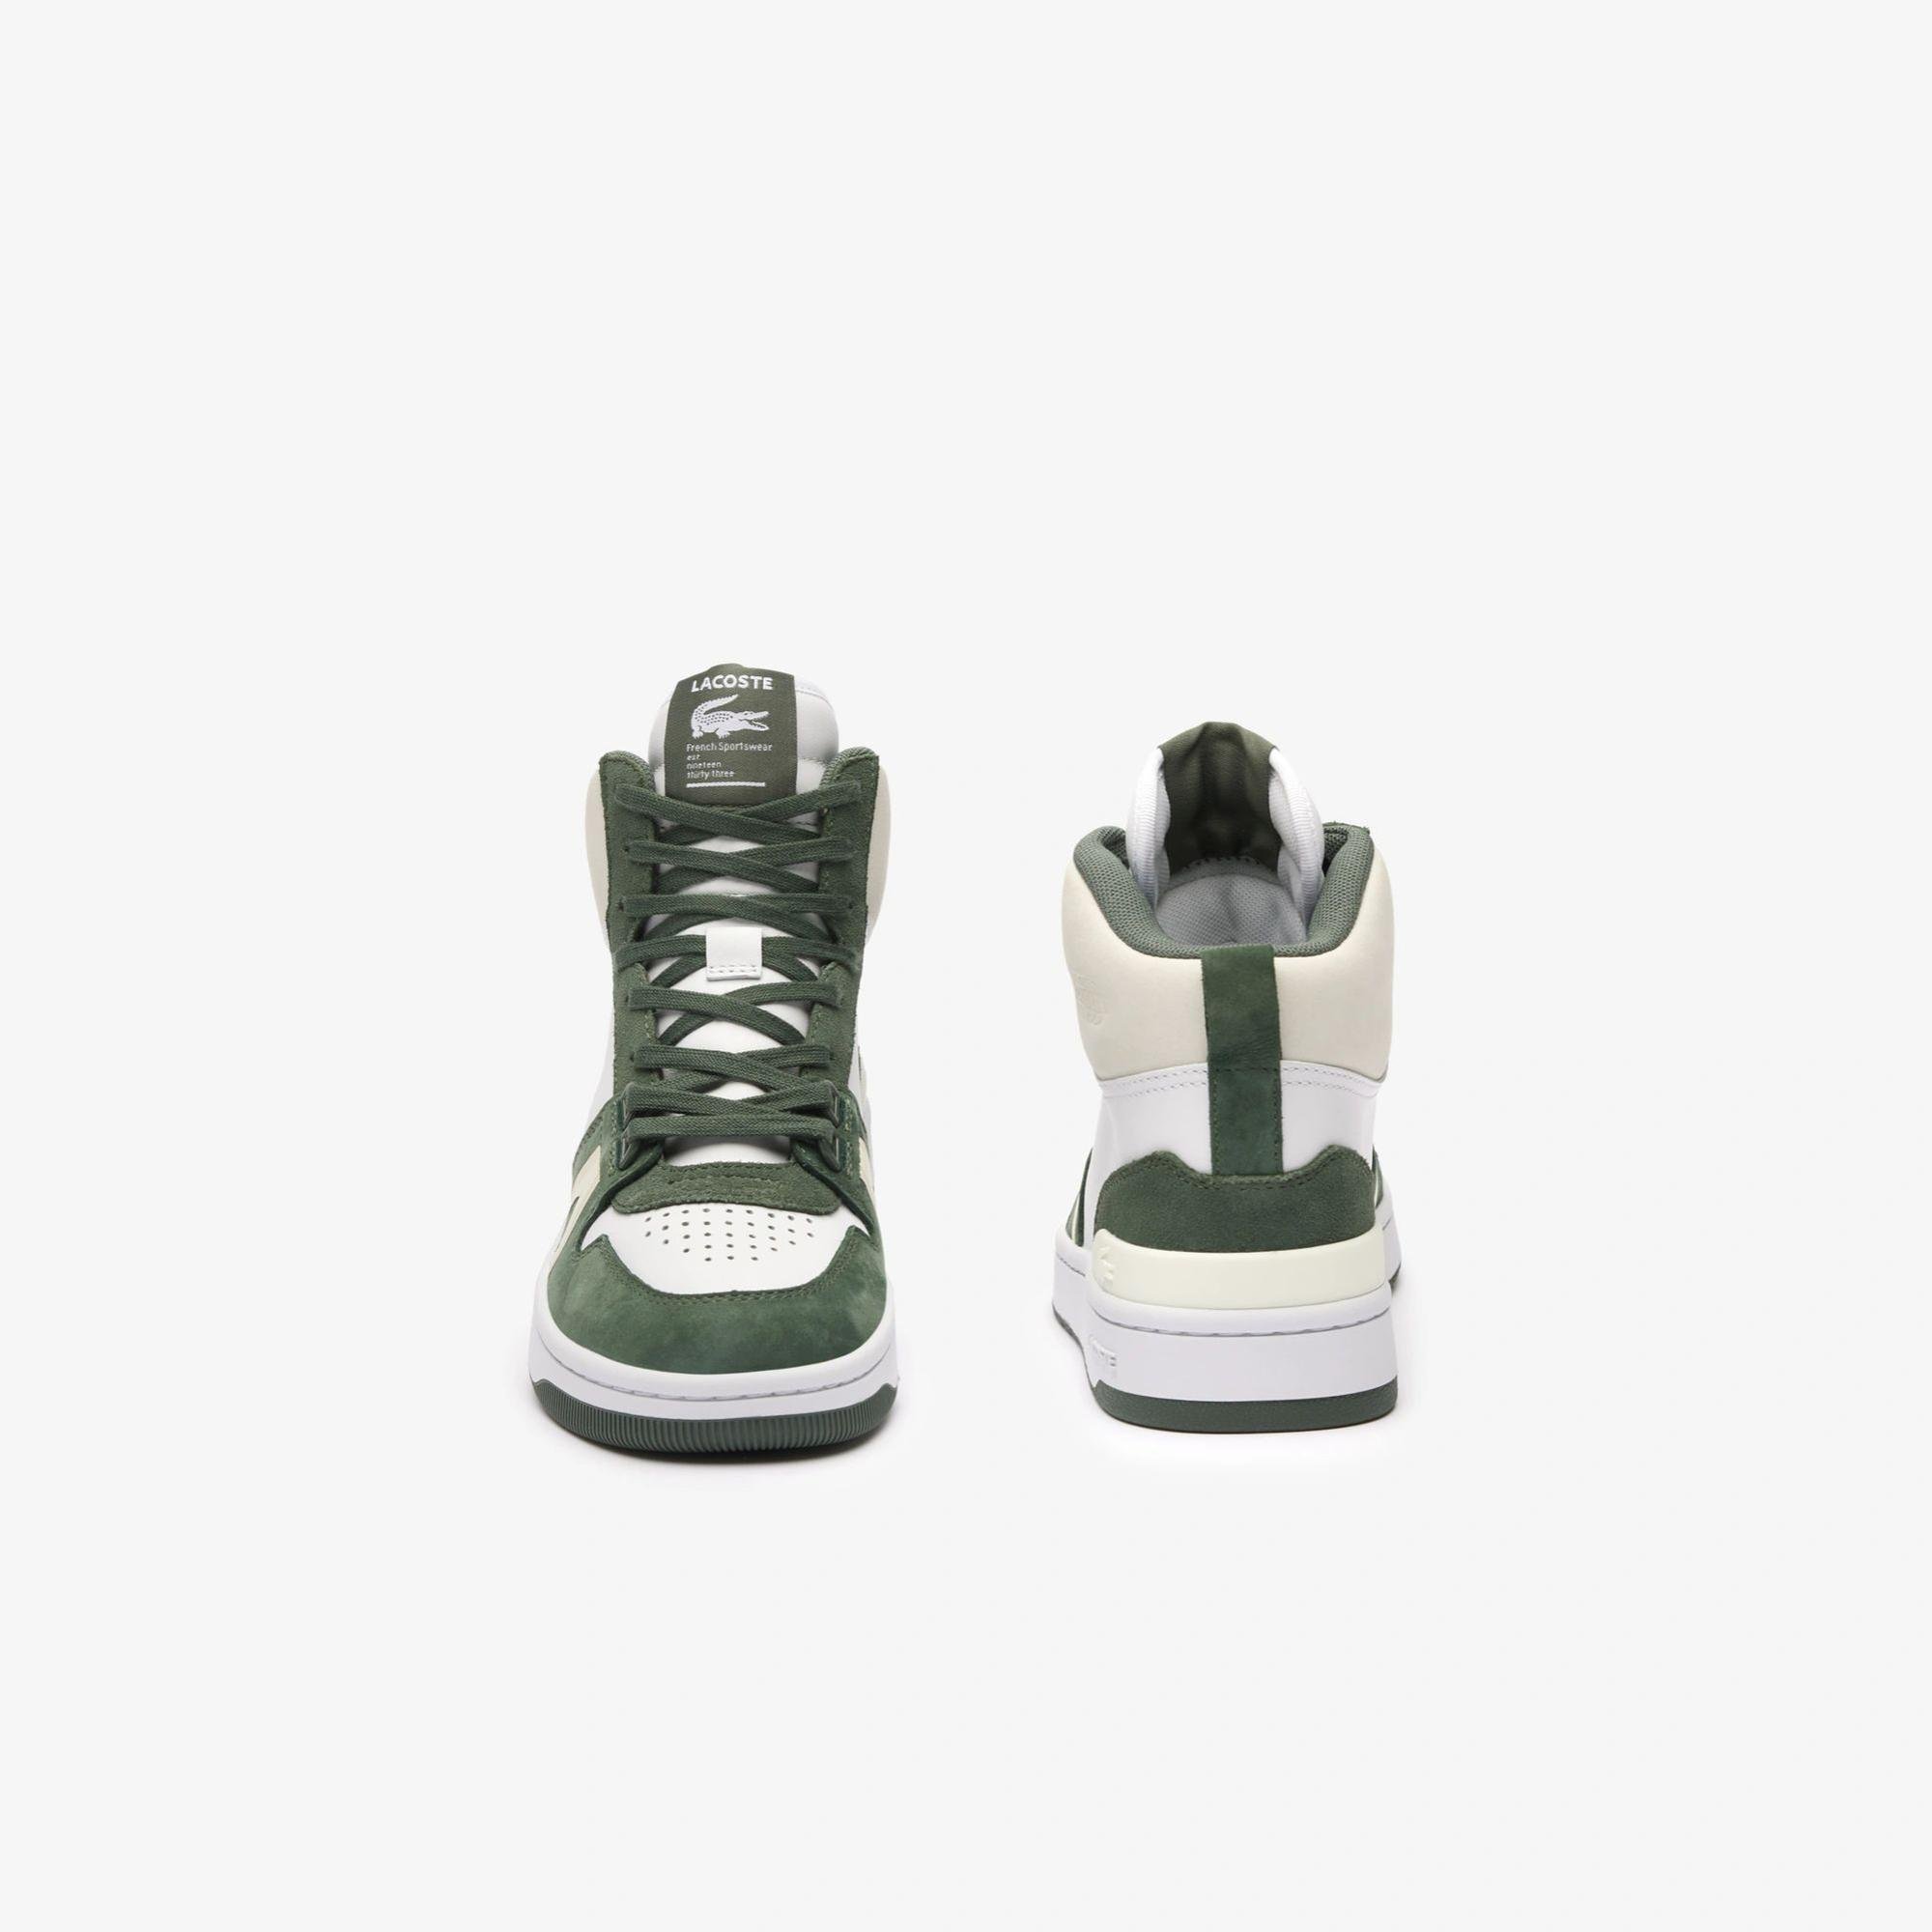 Lacoste Women's L001 Mid Leather Trainers